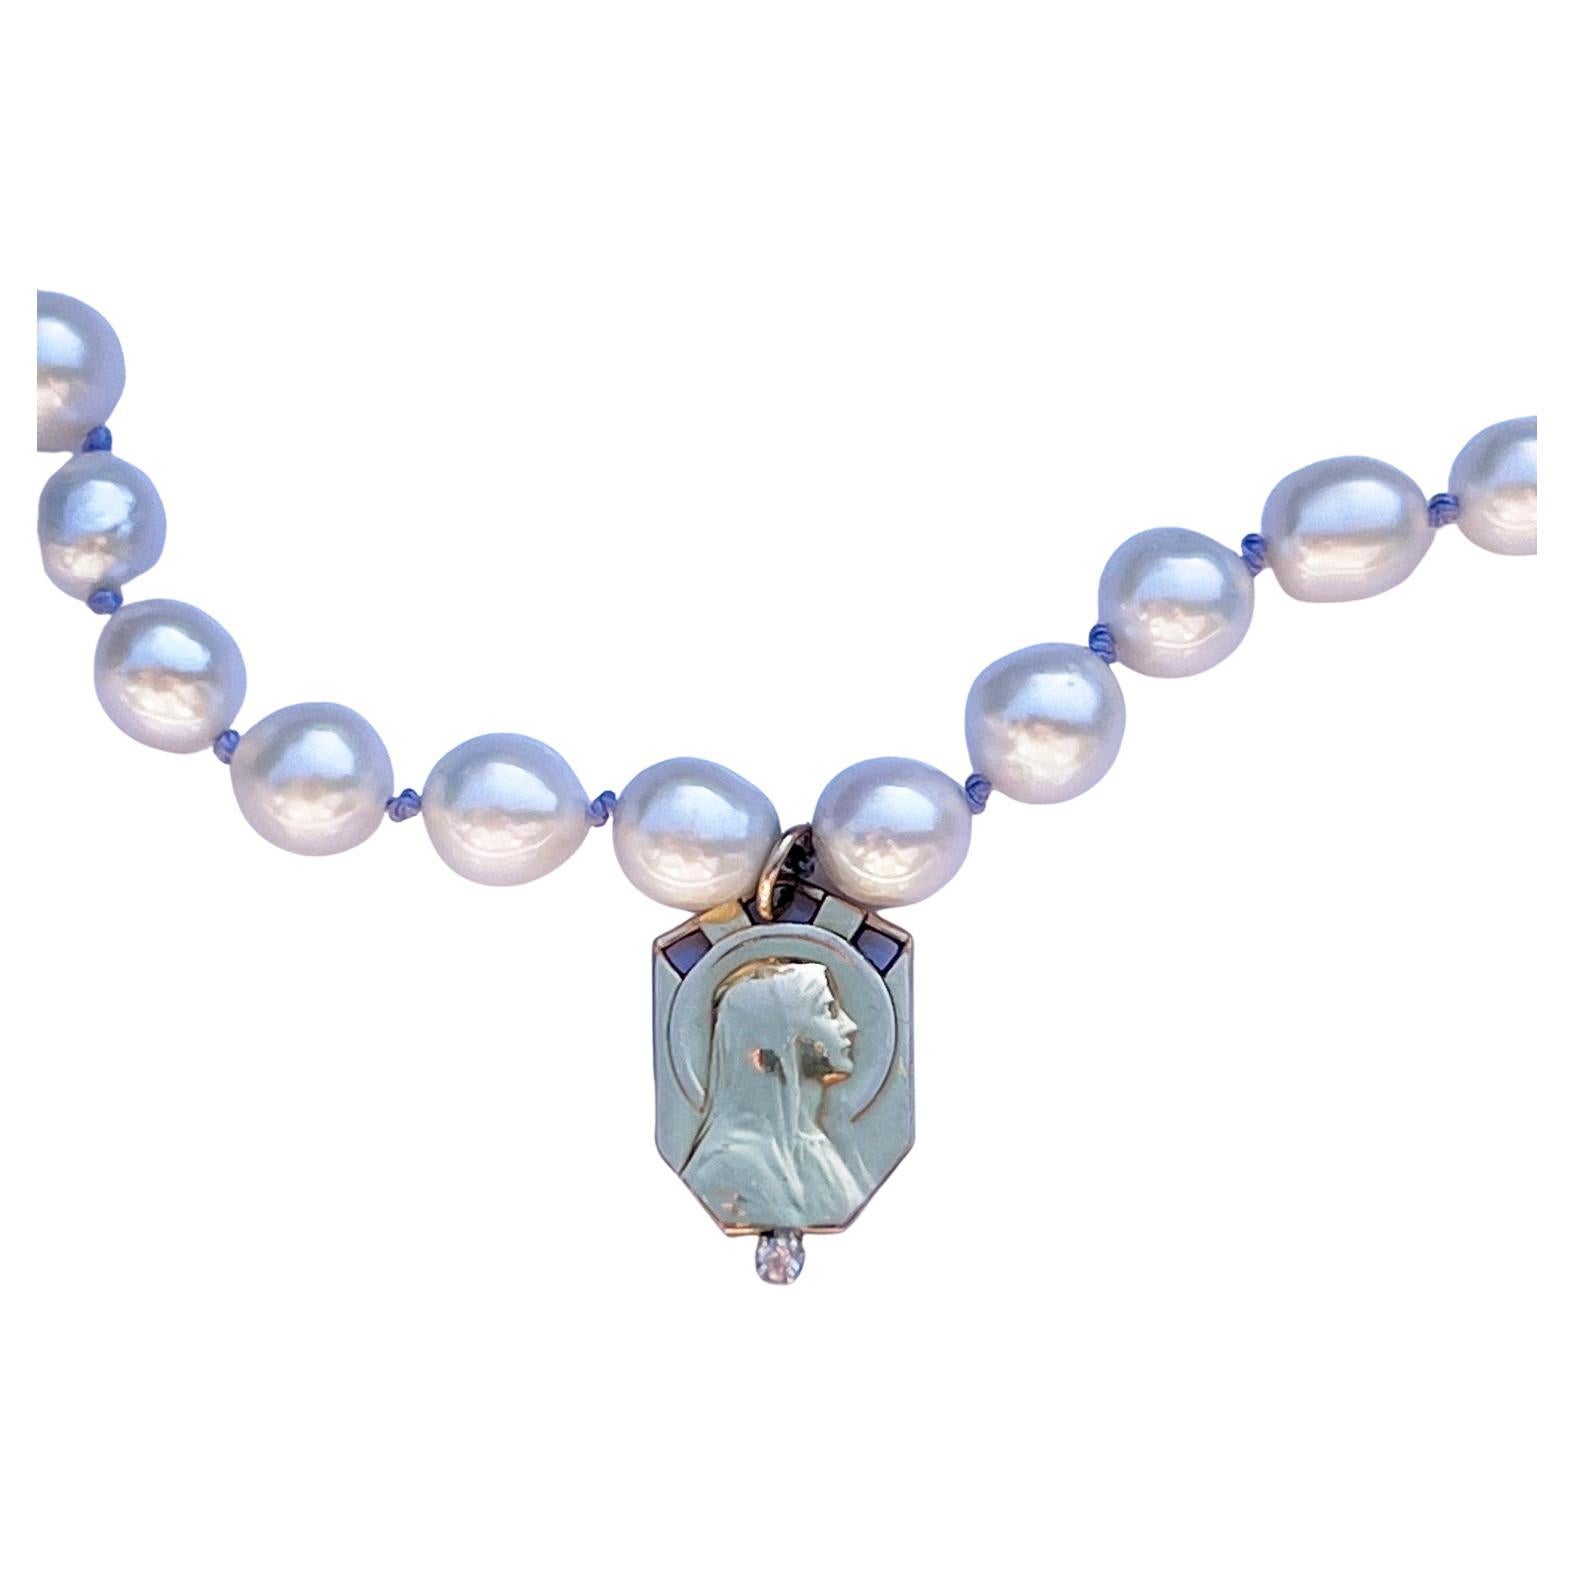 White Diamond Virgin Mary Medal Pearl Necklace Choker Lilac Silk J Dauphin For Sale